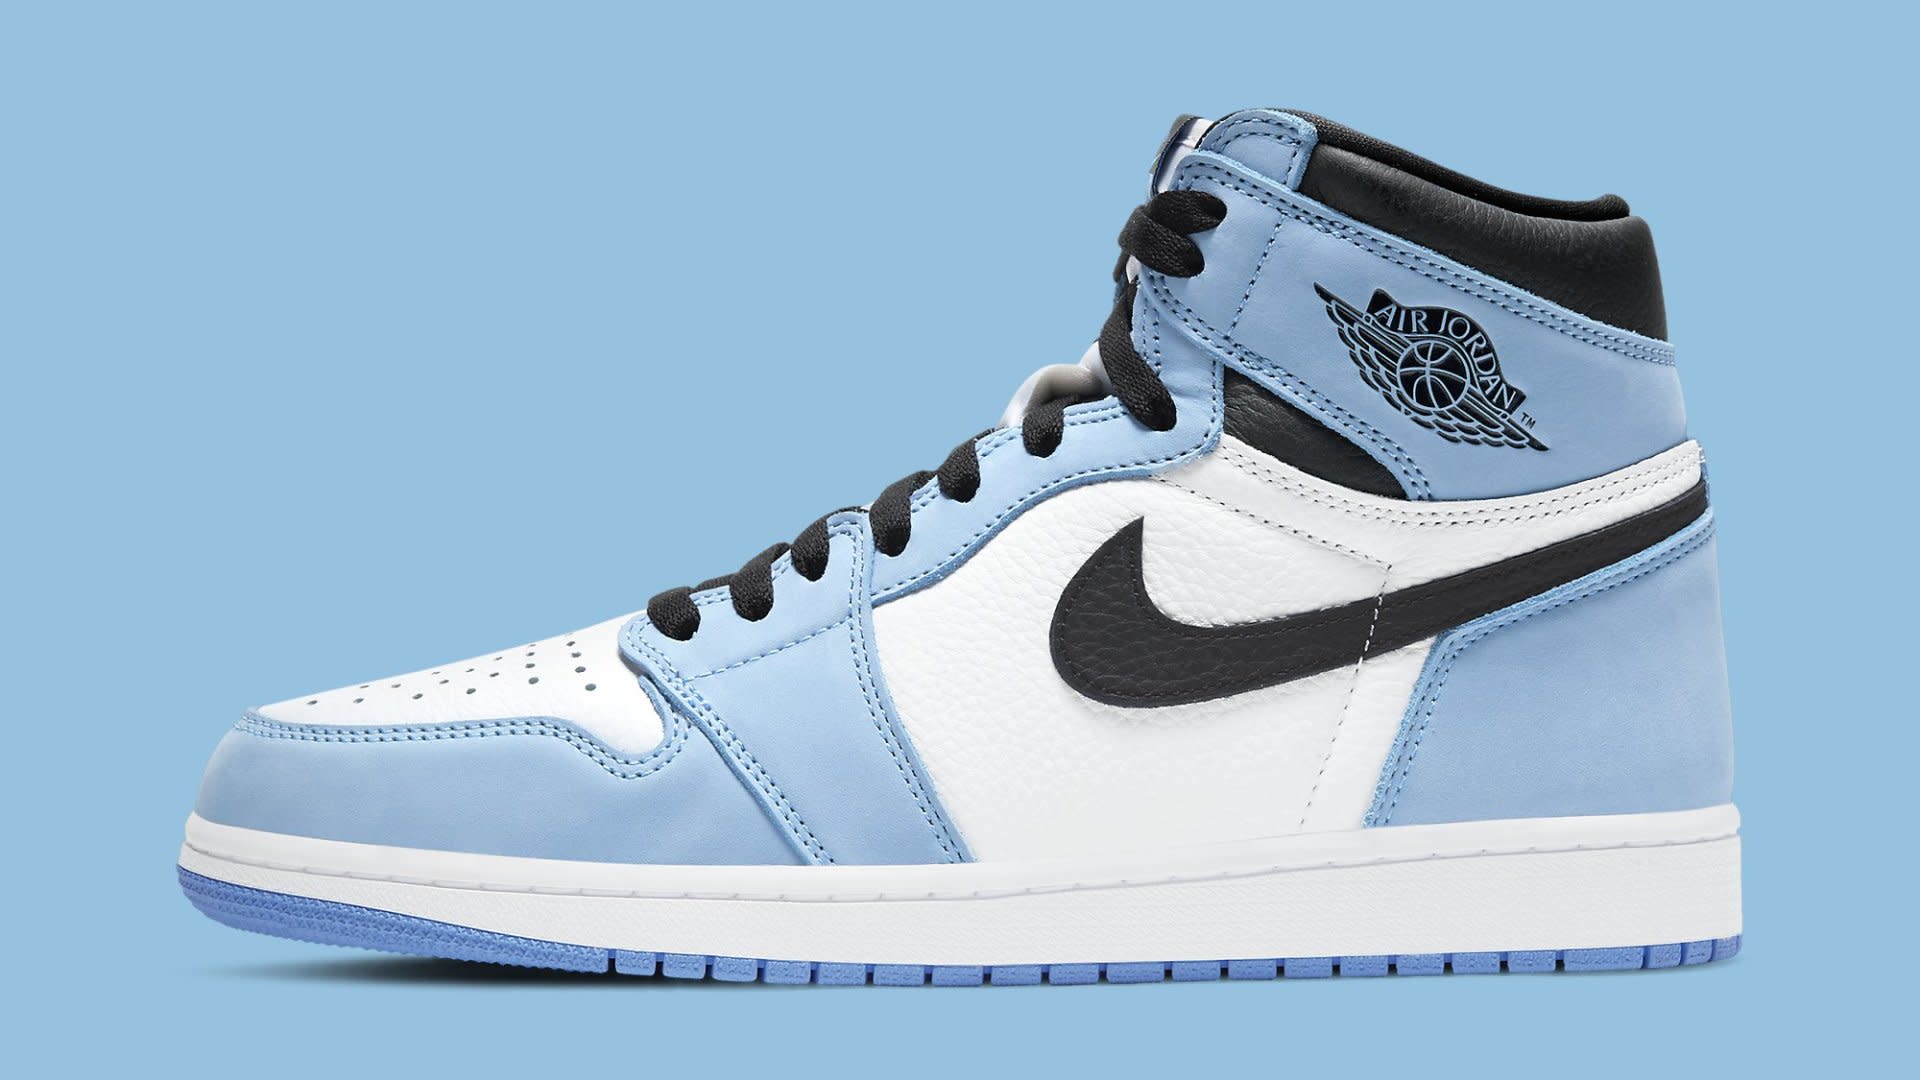 Twitter Was Upset About the 'University Blue' Air Jordan 1 Release on SNKRS